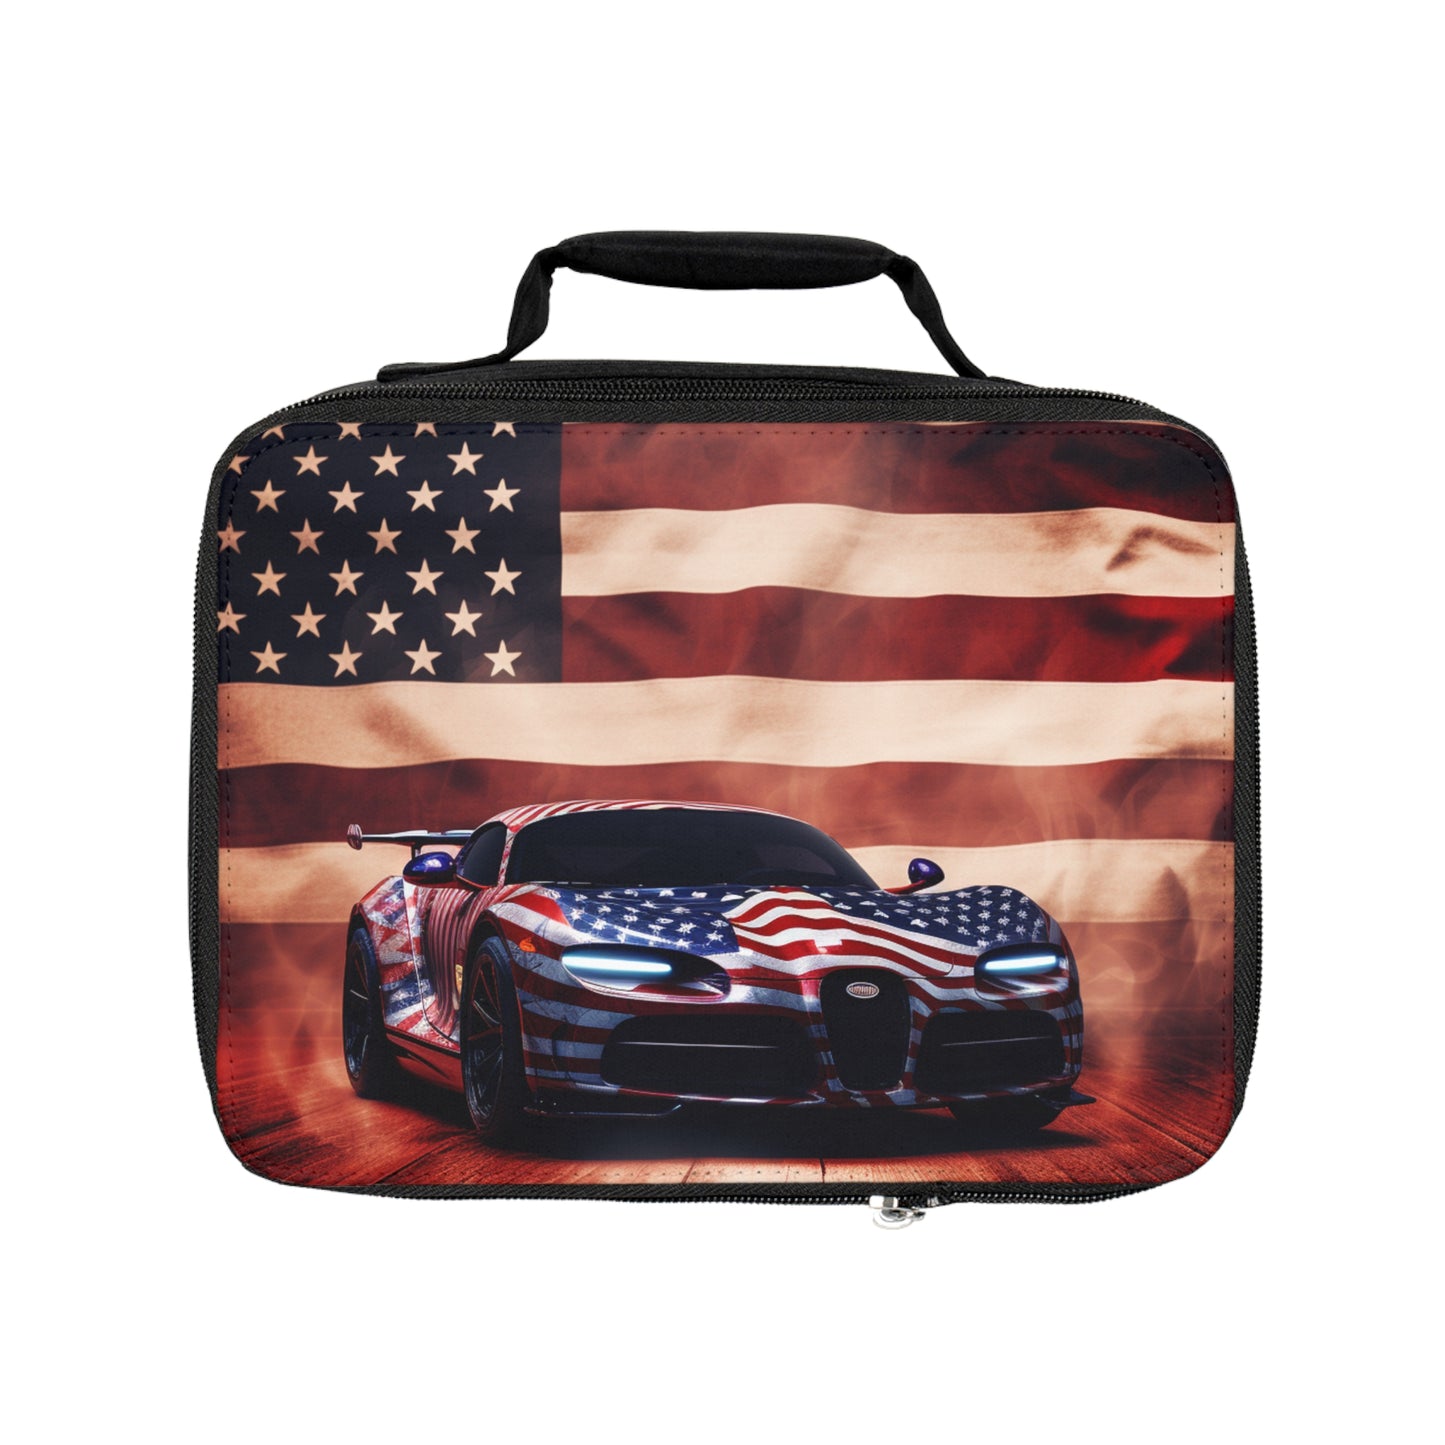 Lunch Bag Abstract American Flag Background Bugatti 2